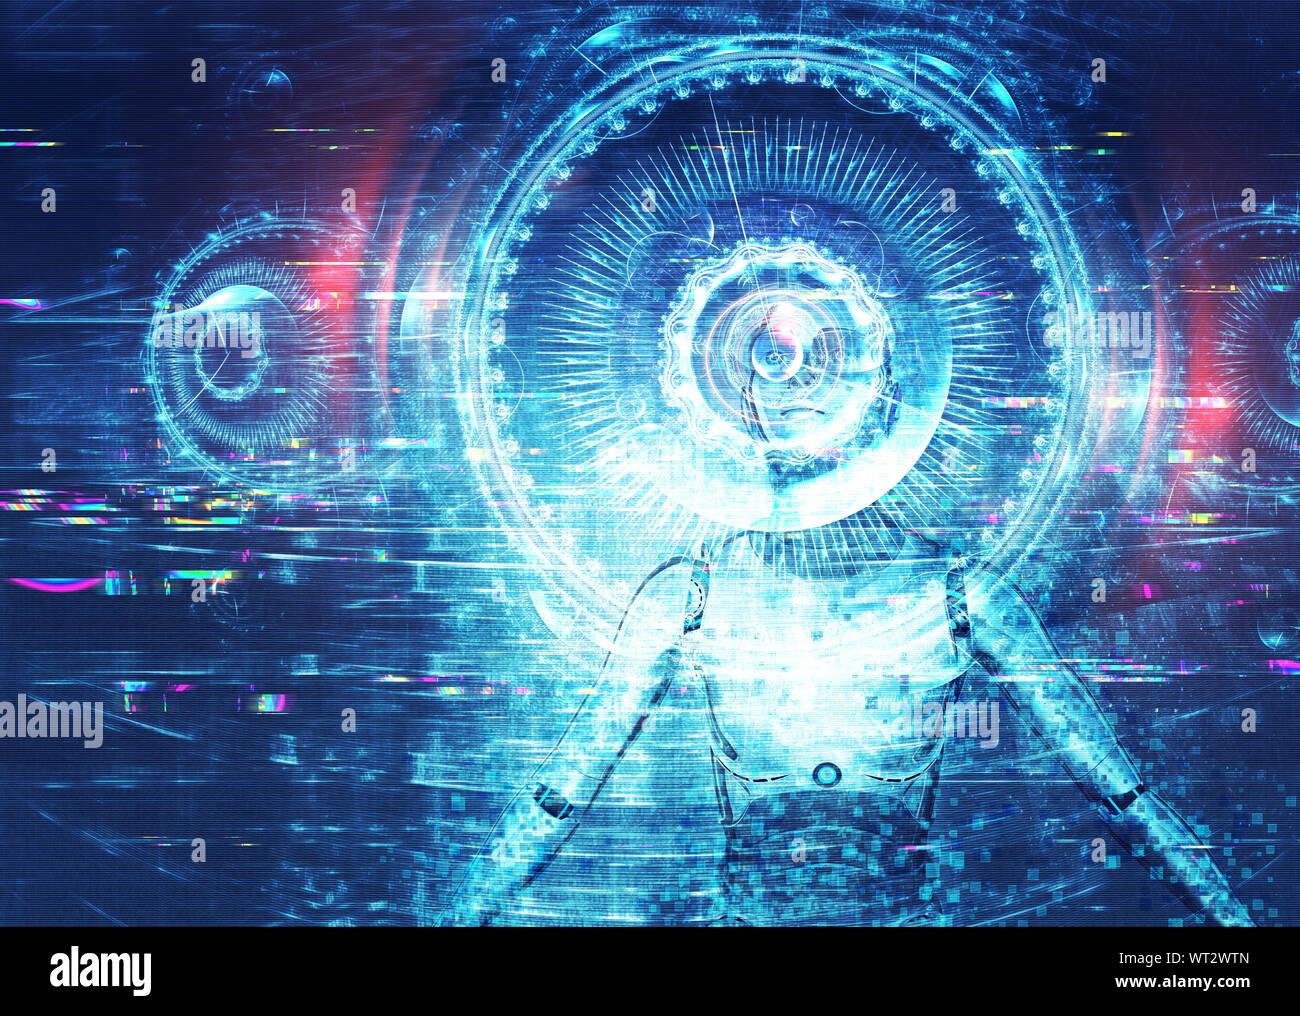 Modern futuristic background with robot, cyborg and digital interface design, 3d illustration. Stock Photo